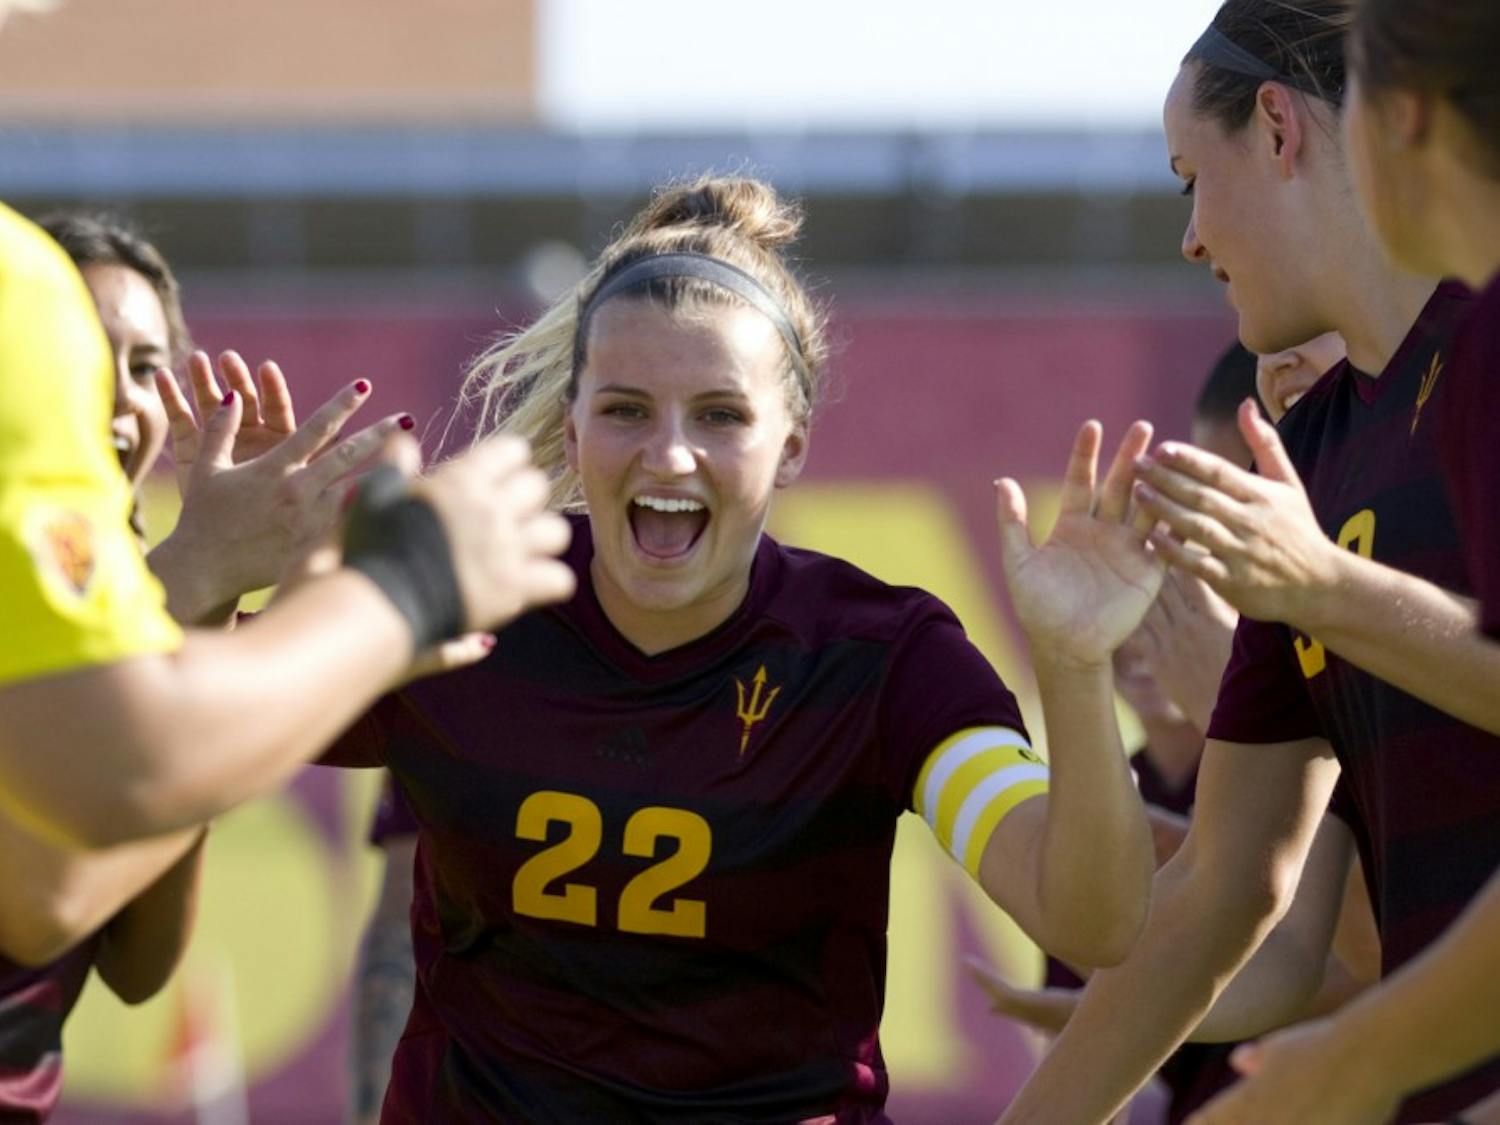 ASU junior defender Madison Stark runs through the tunnel of teammates during player introductions before a 2-0 win over Cal State Fullerton in Sun Devil Soccer Stadium in Tempe, Arizona, on Friday, Sept. 16, 2016.